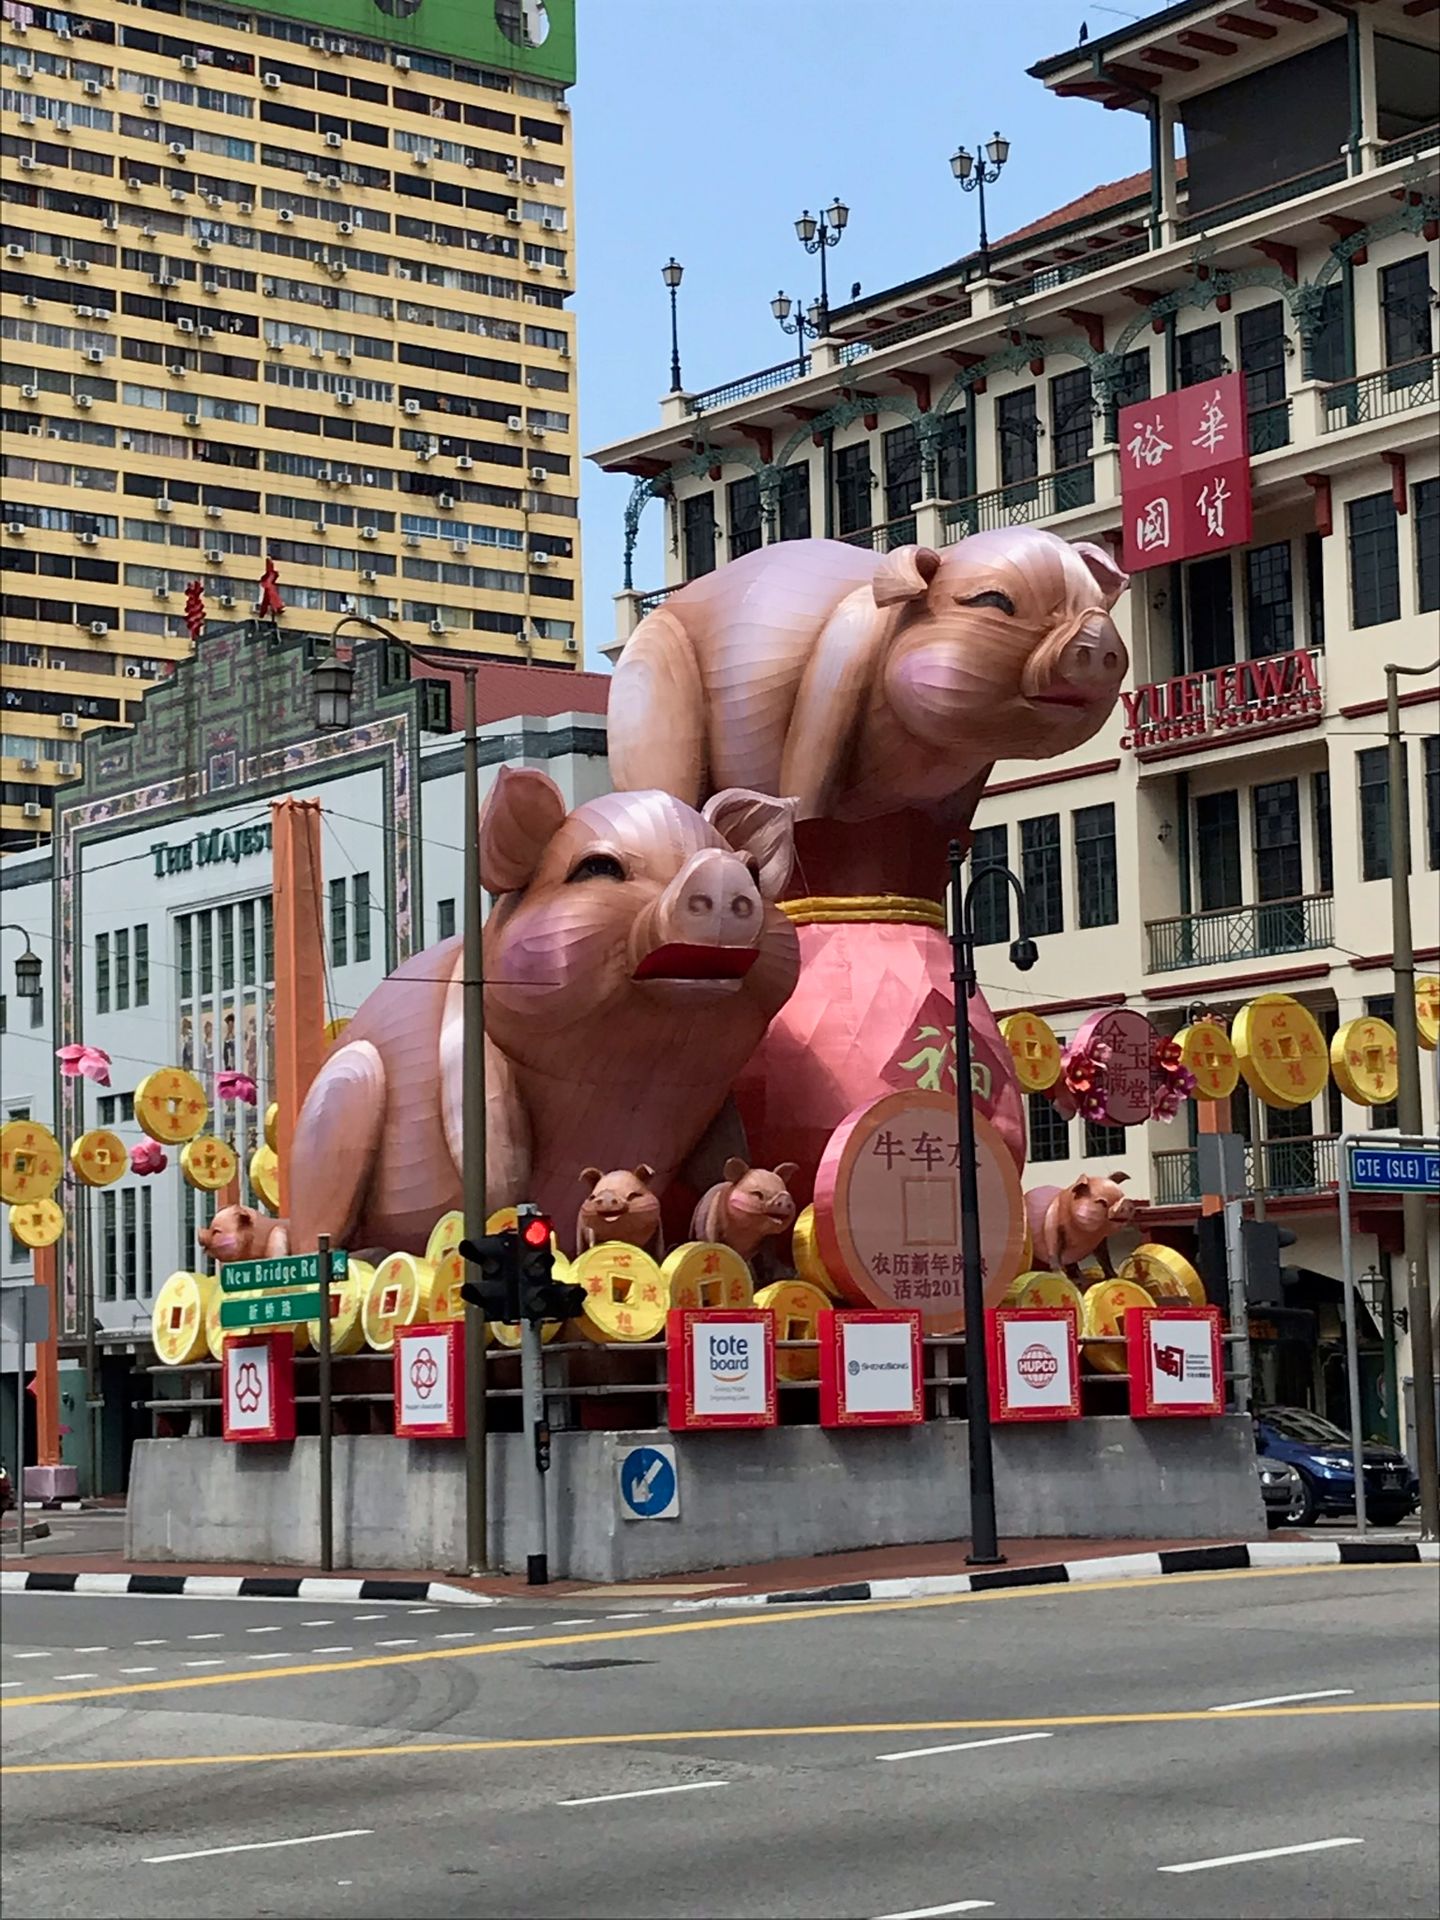 Pigs at the beginning of Chinatown😍